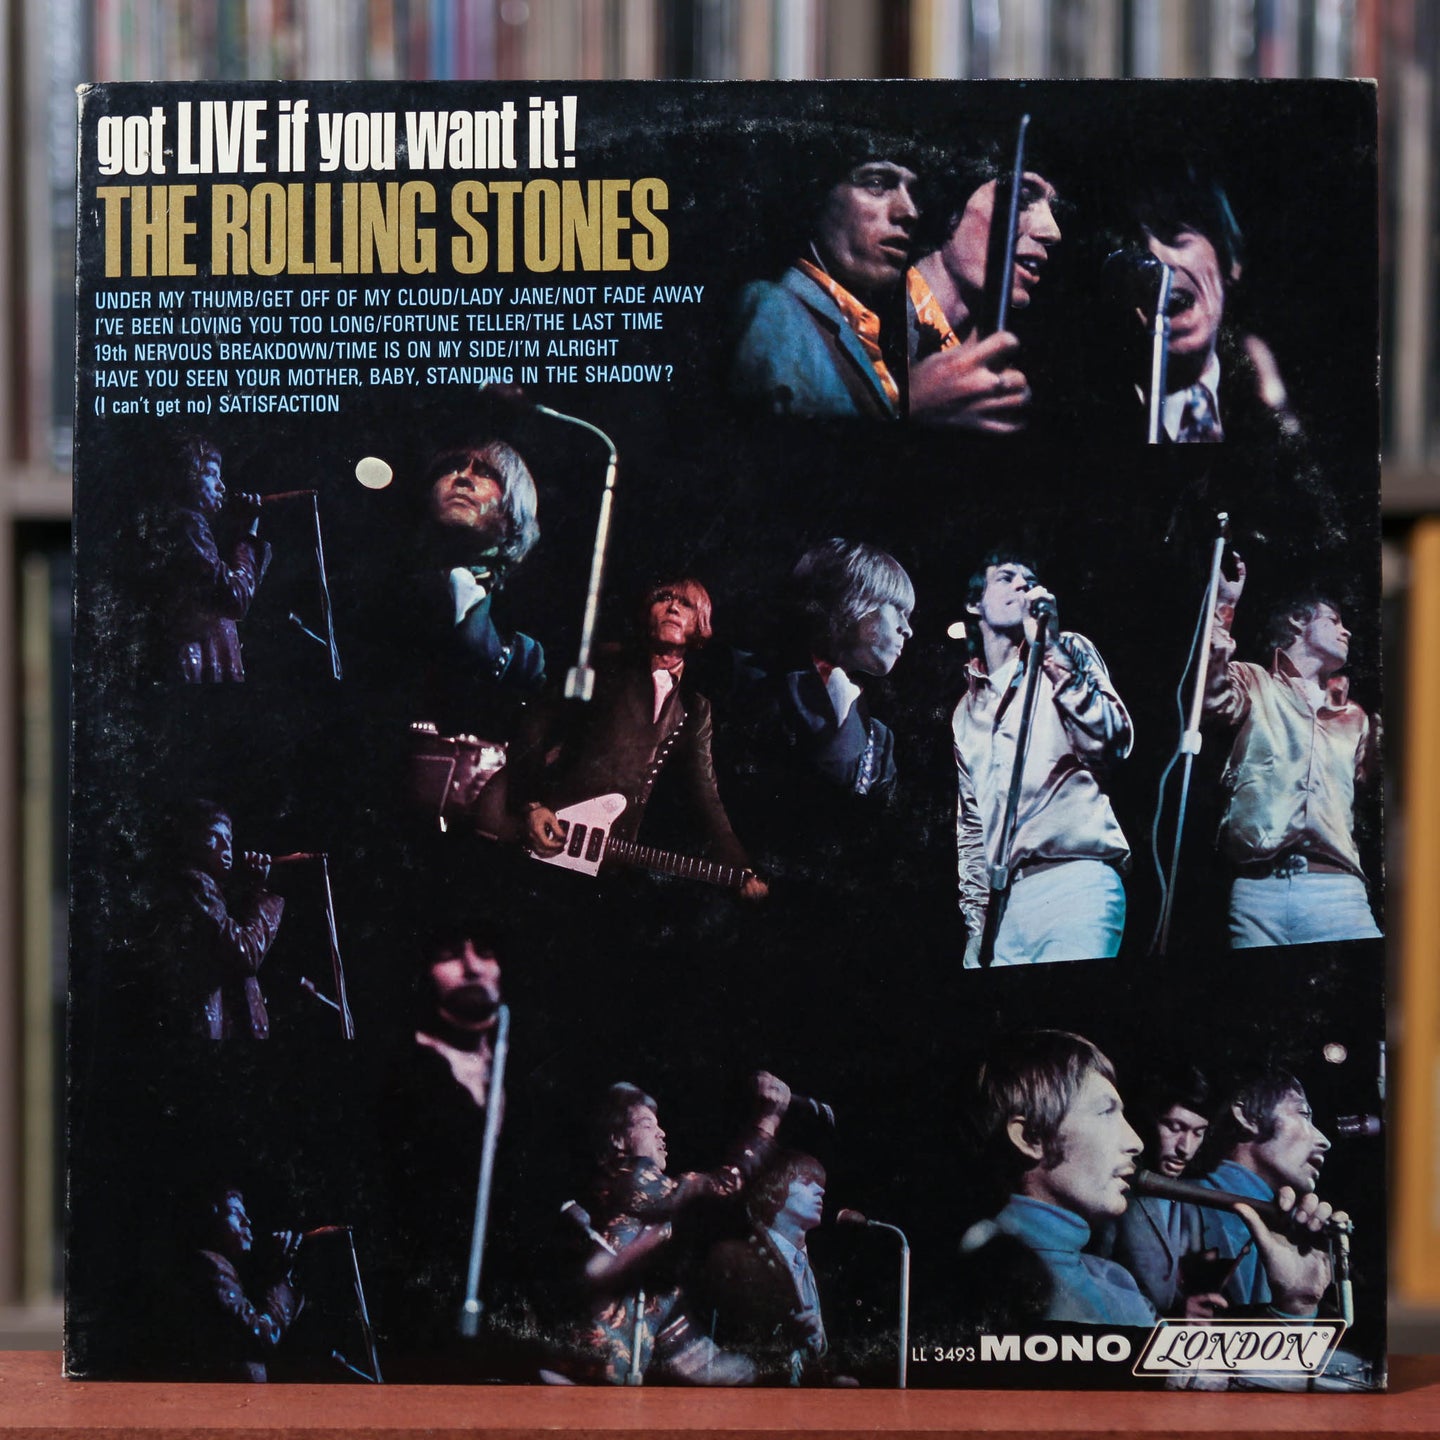 Rolling Stones - Got Live If You Want It! - 1966 London, EX/VG